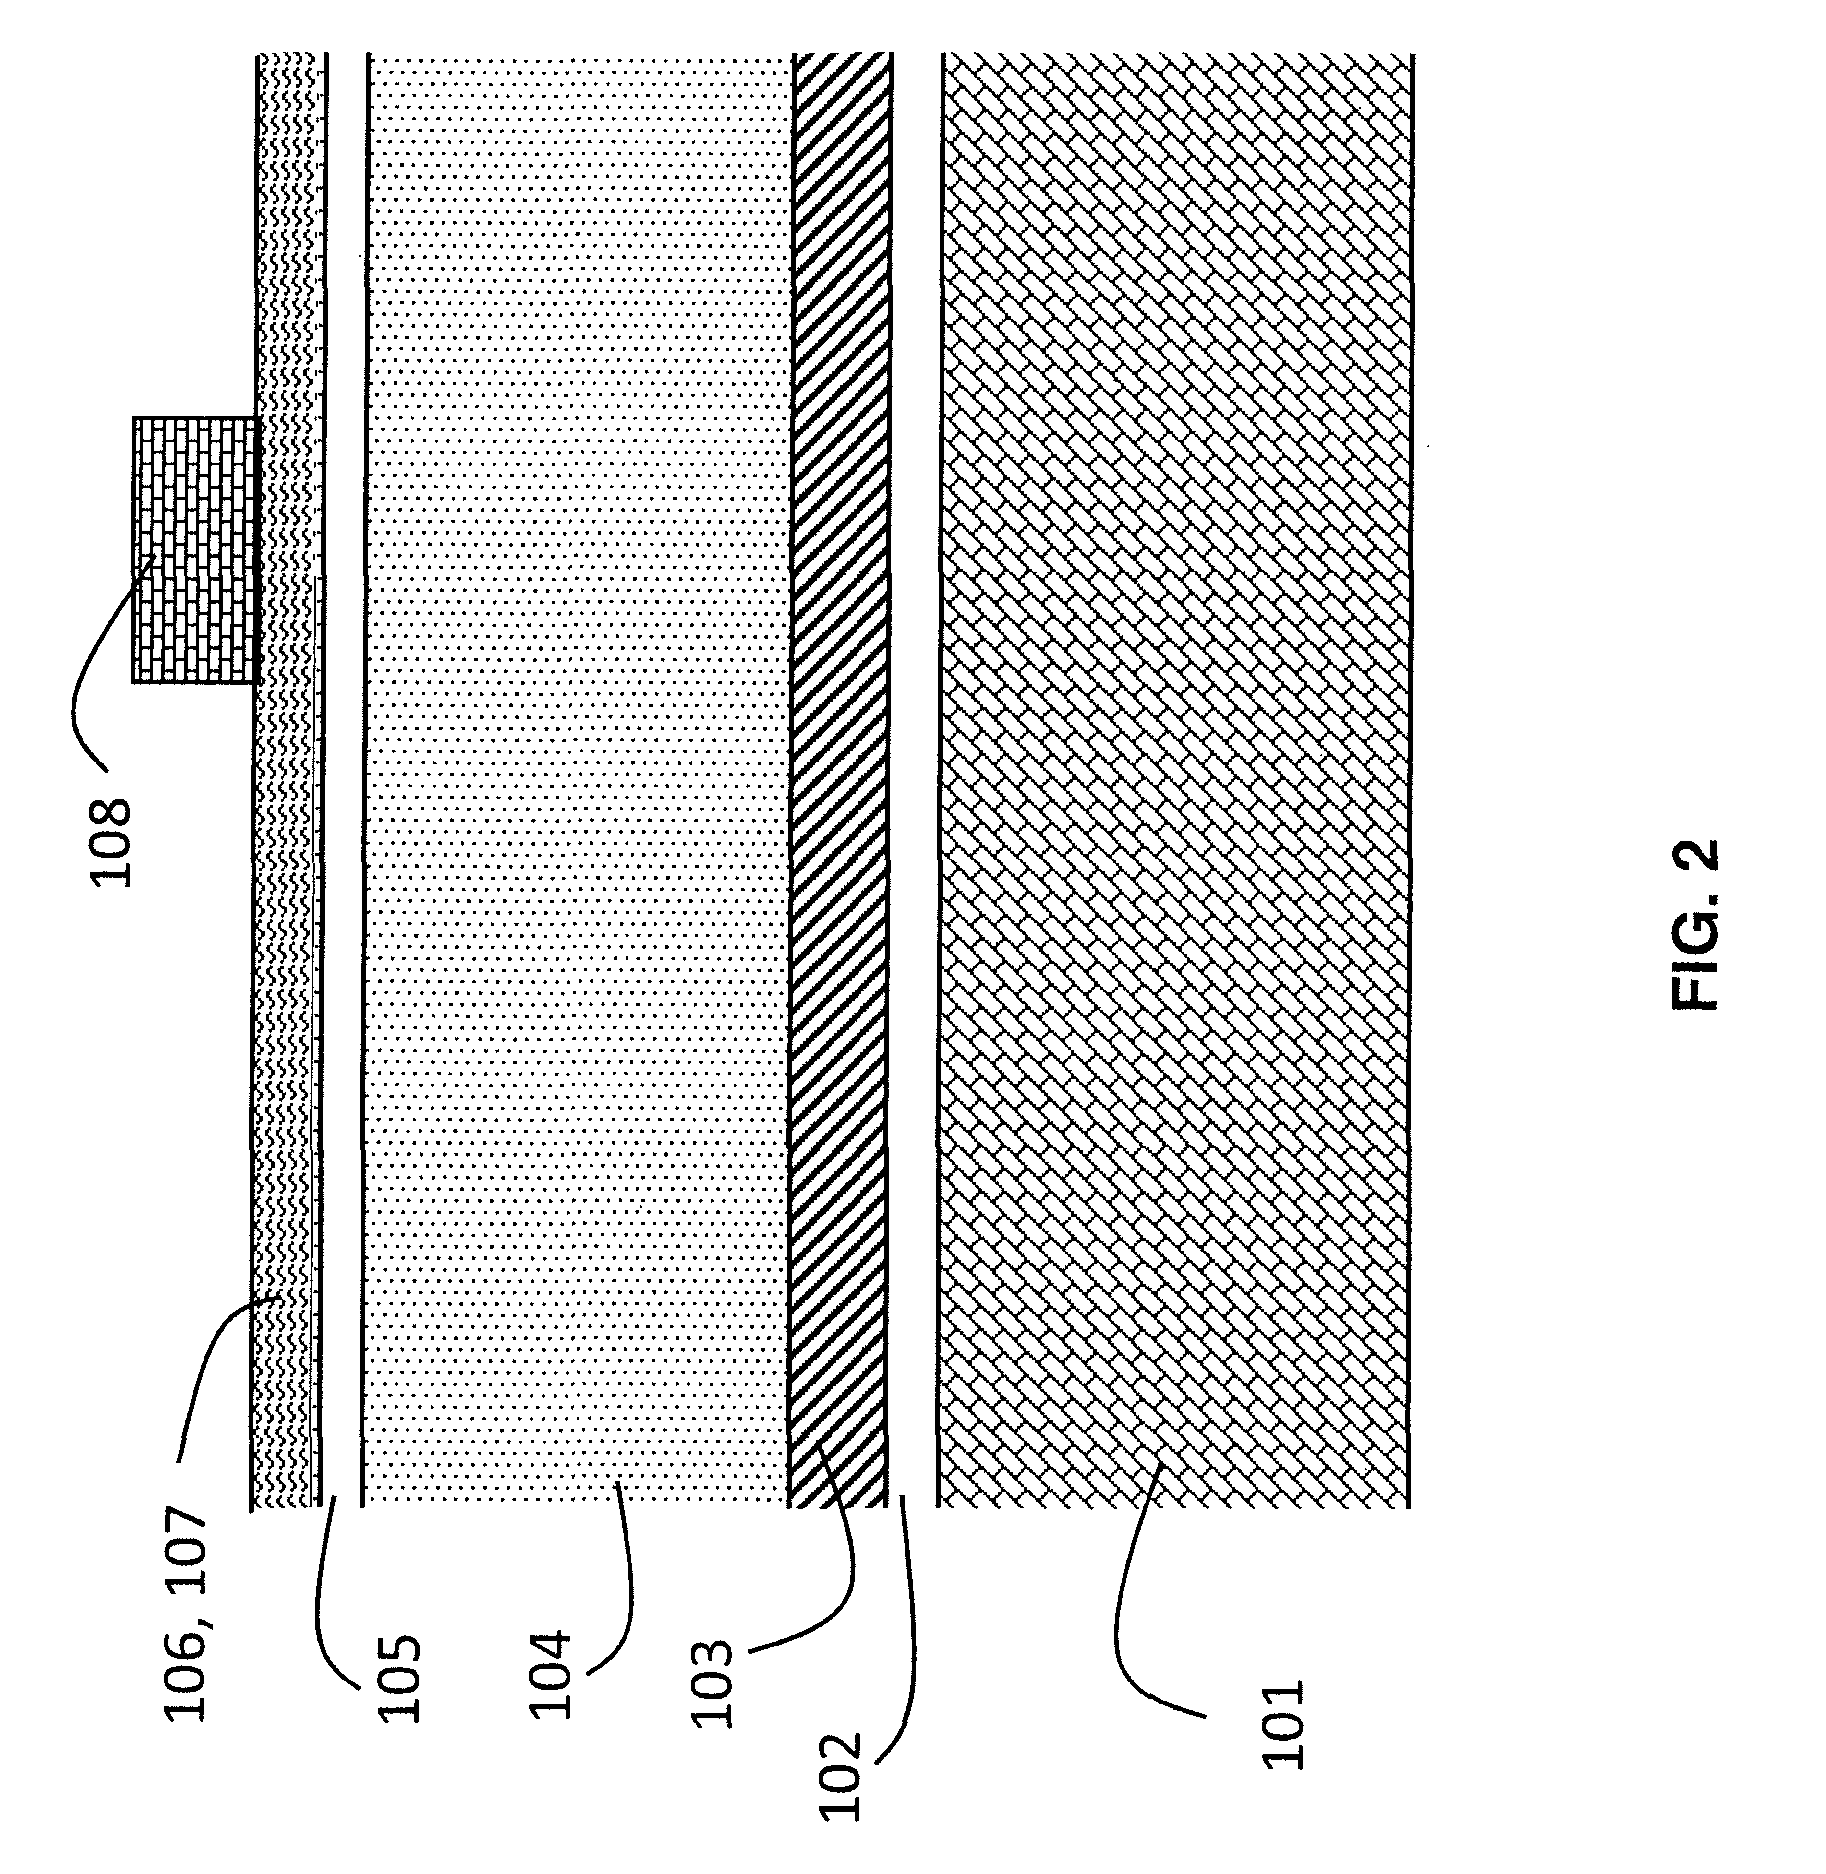 Passivated emitter rear locally patterned epitaxial solar cell